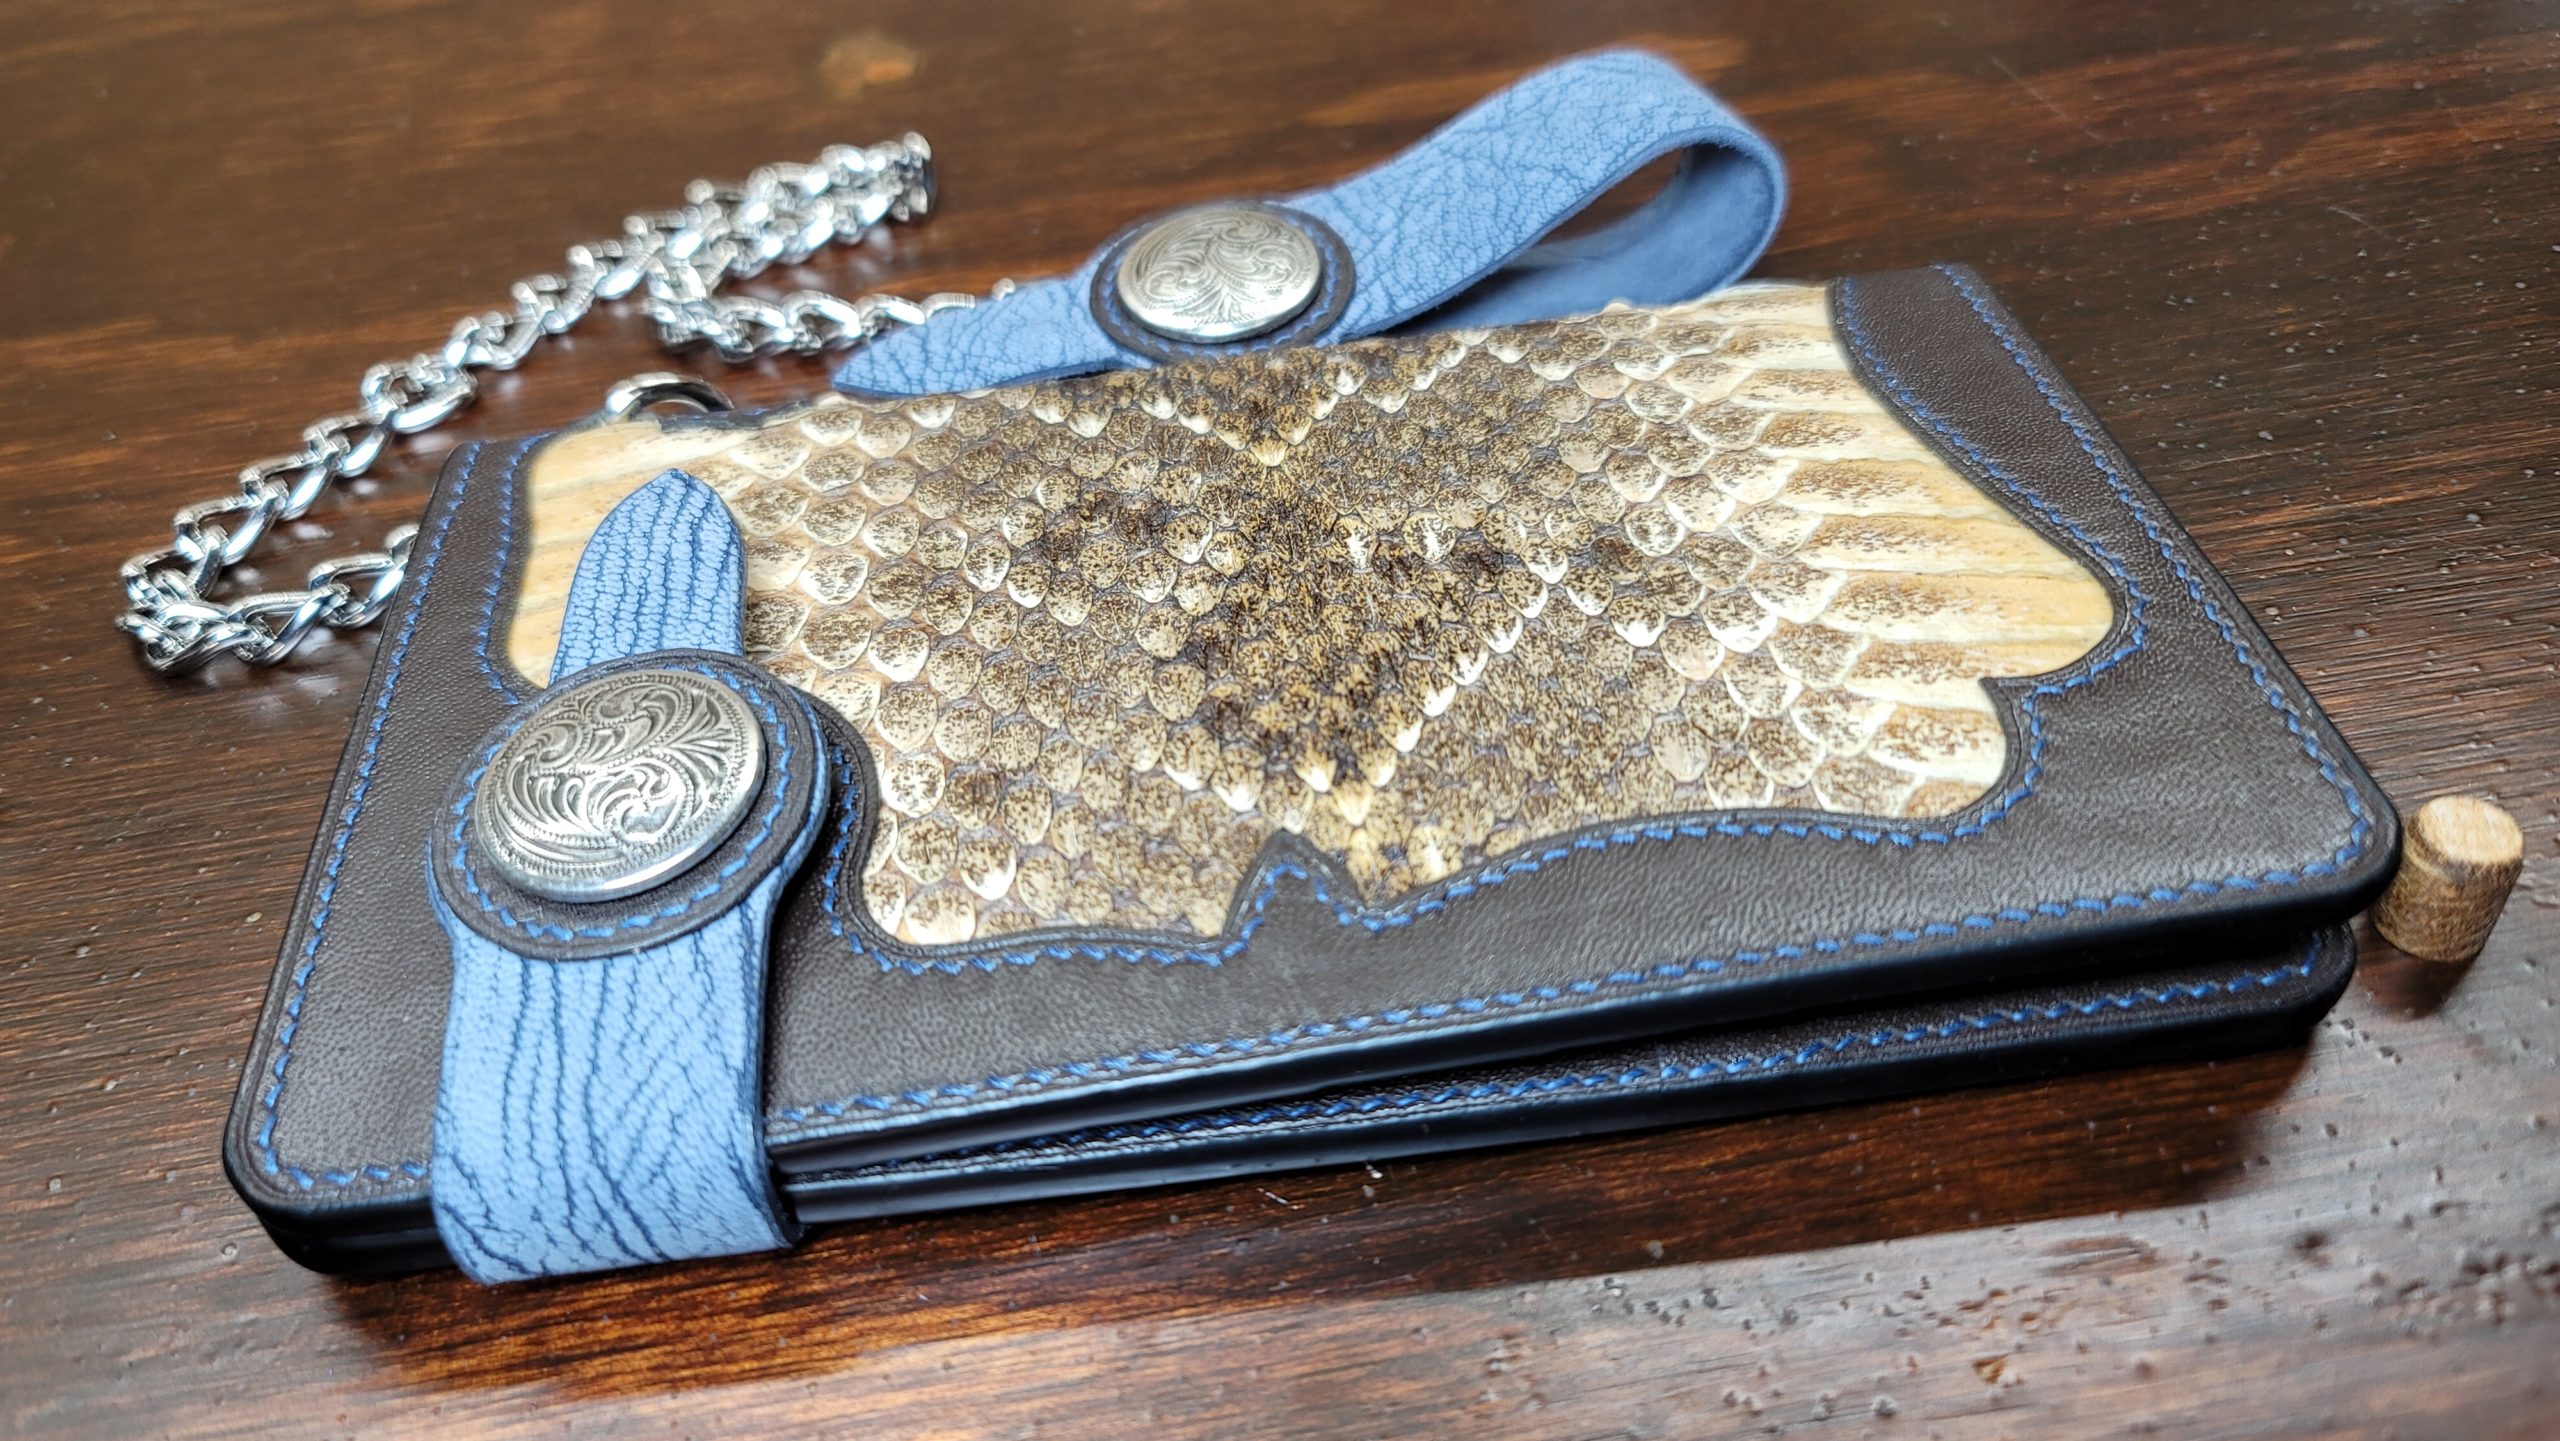 Western Exotic Skin Wallets and Leather Wallets